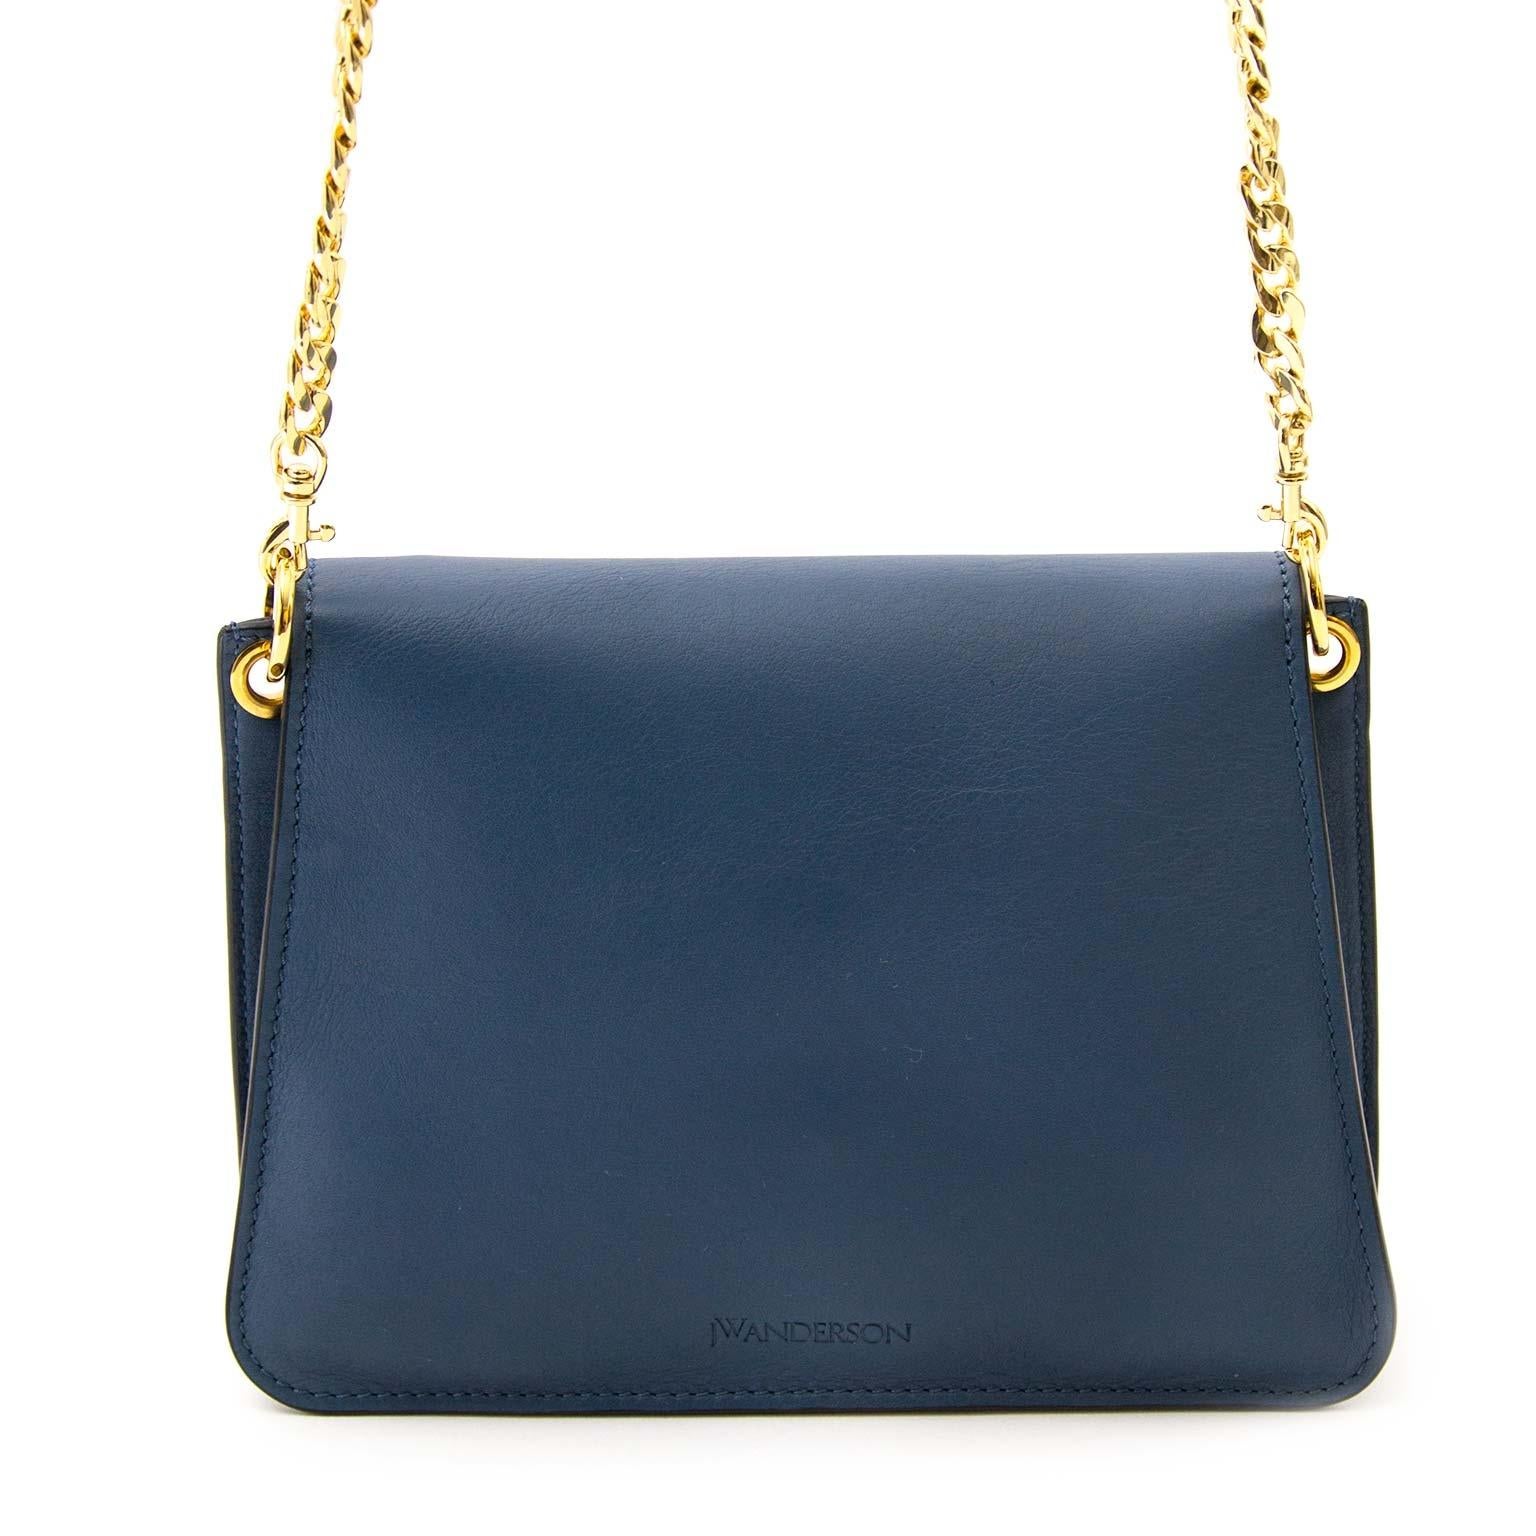 Brand New!

JW Anderson Mini Pierce Bag Storm Blue

This gorgeous crossbody bag is made from beautiful blue calfskin leather and features all the iconic JW Anderson Pierce bag trademarks. The bag has gold-tone metal hardware and a signature